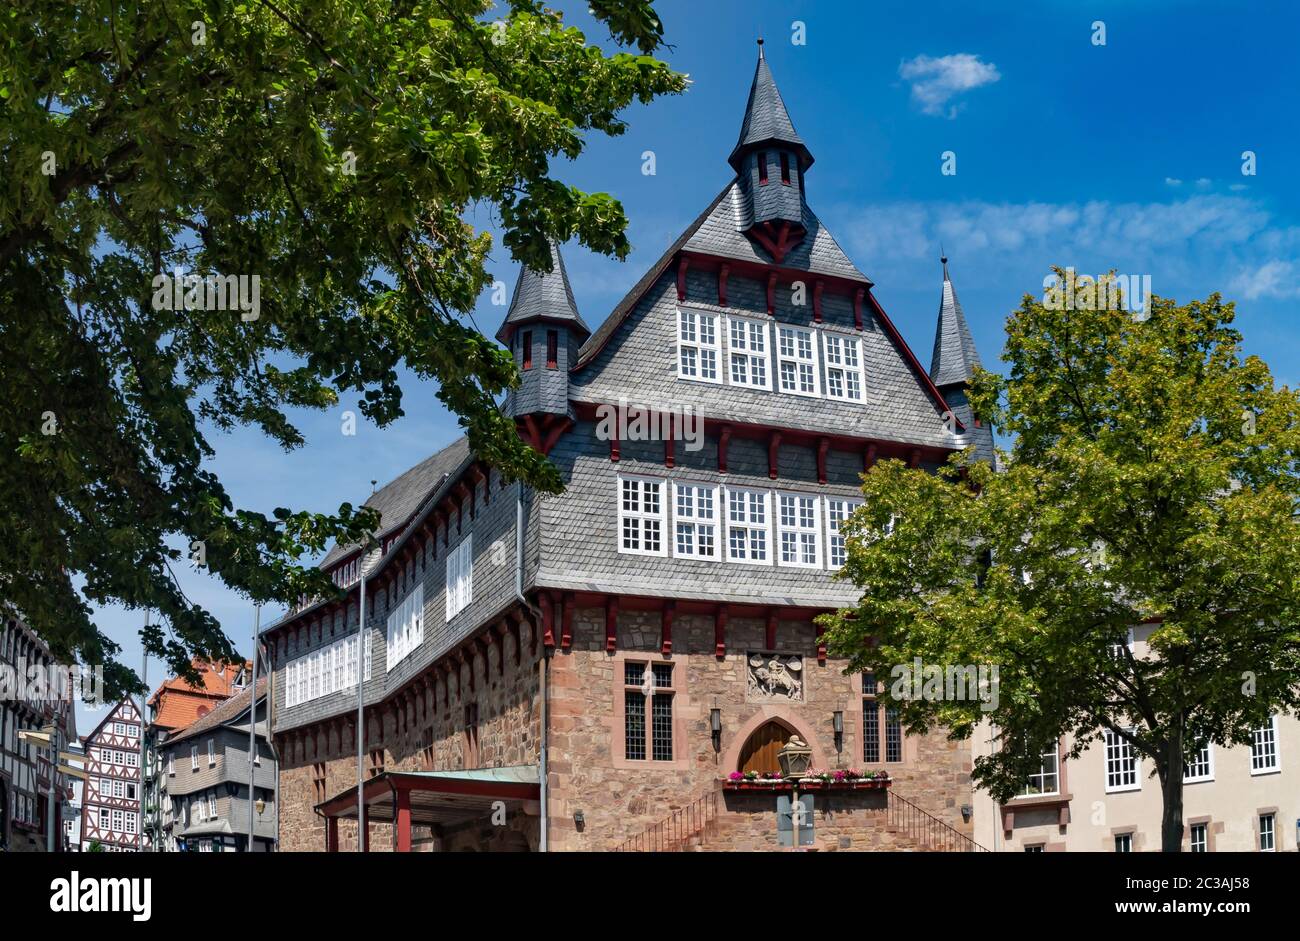 town hall, fritzlar, small town, historic, tradition, town, germany, north hesse, building, sky, clouds, summer, imposing, slate, stone house, towers, Stock Photo